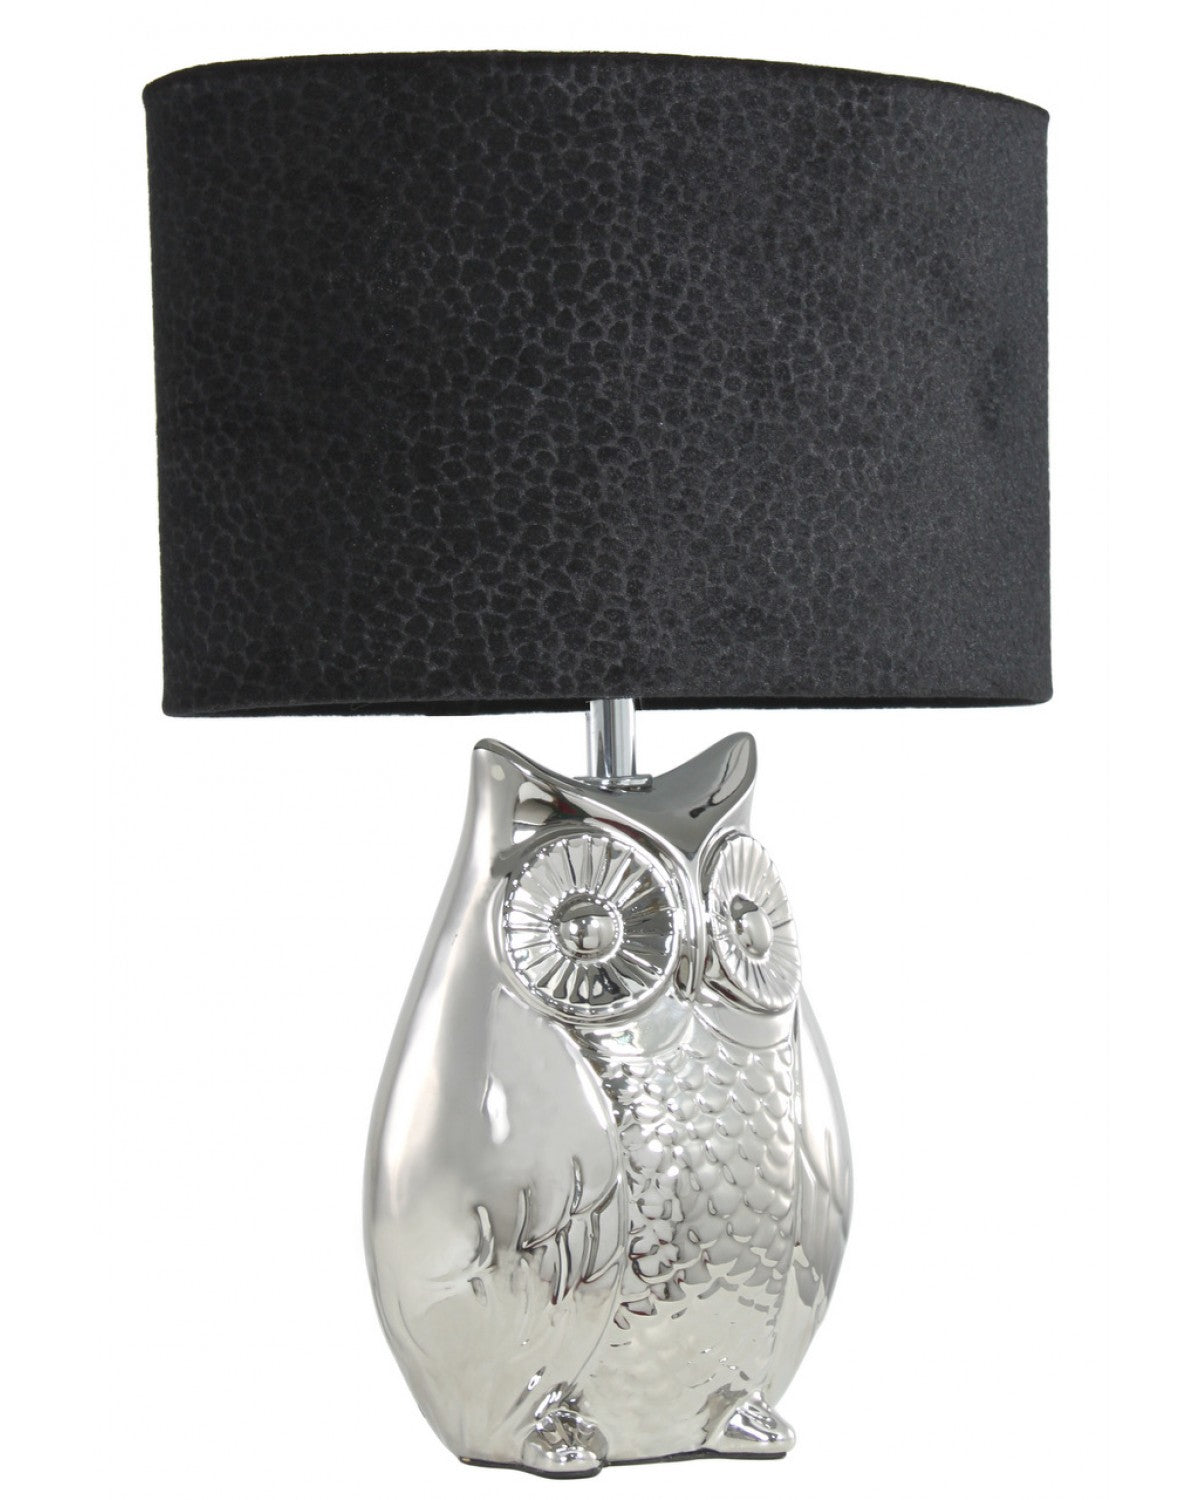 Deco Home Silver Oval Owl Table Lamp With Black Shade White